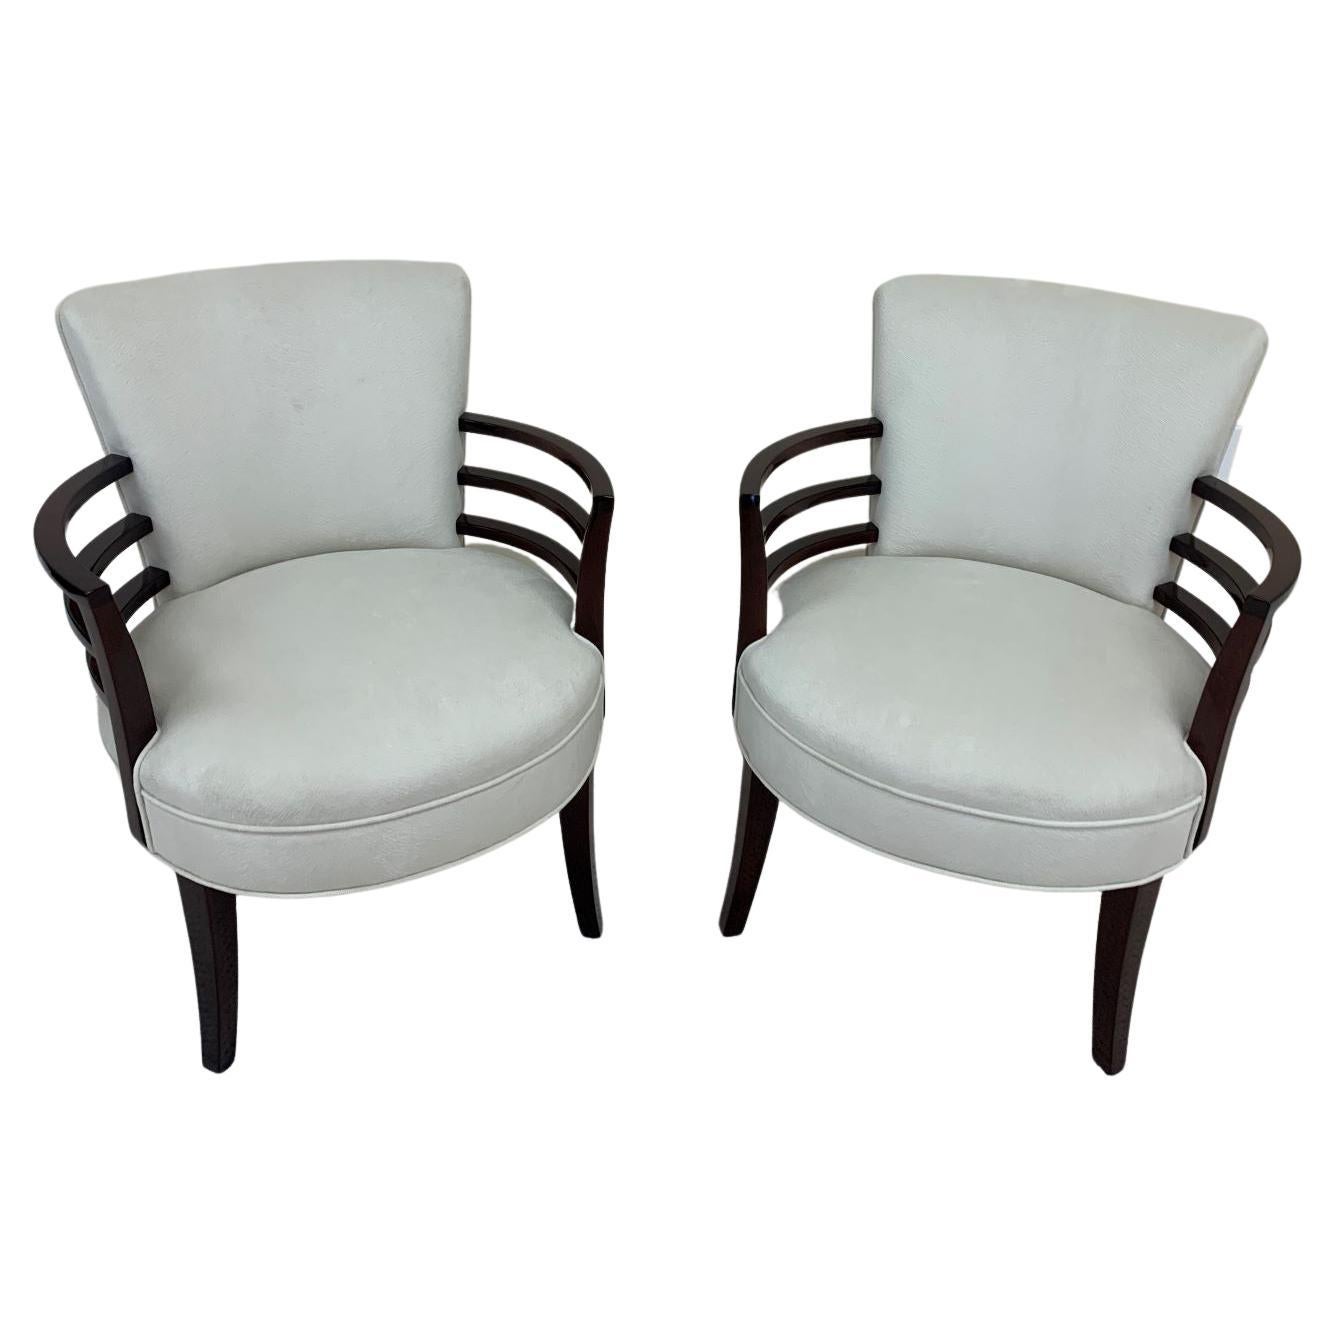 Pair of Art Deco circular chairs in the style of Gilbert Rohde. Unique design with the three speed band arms following the curve of the seat. Beautifully restored wood in a walnut gloss finished, complimented by a faux pony skin upholstery.